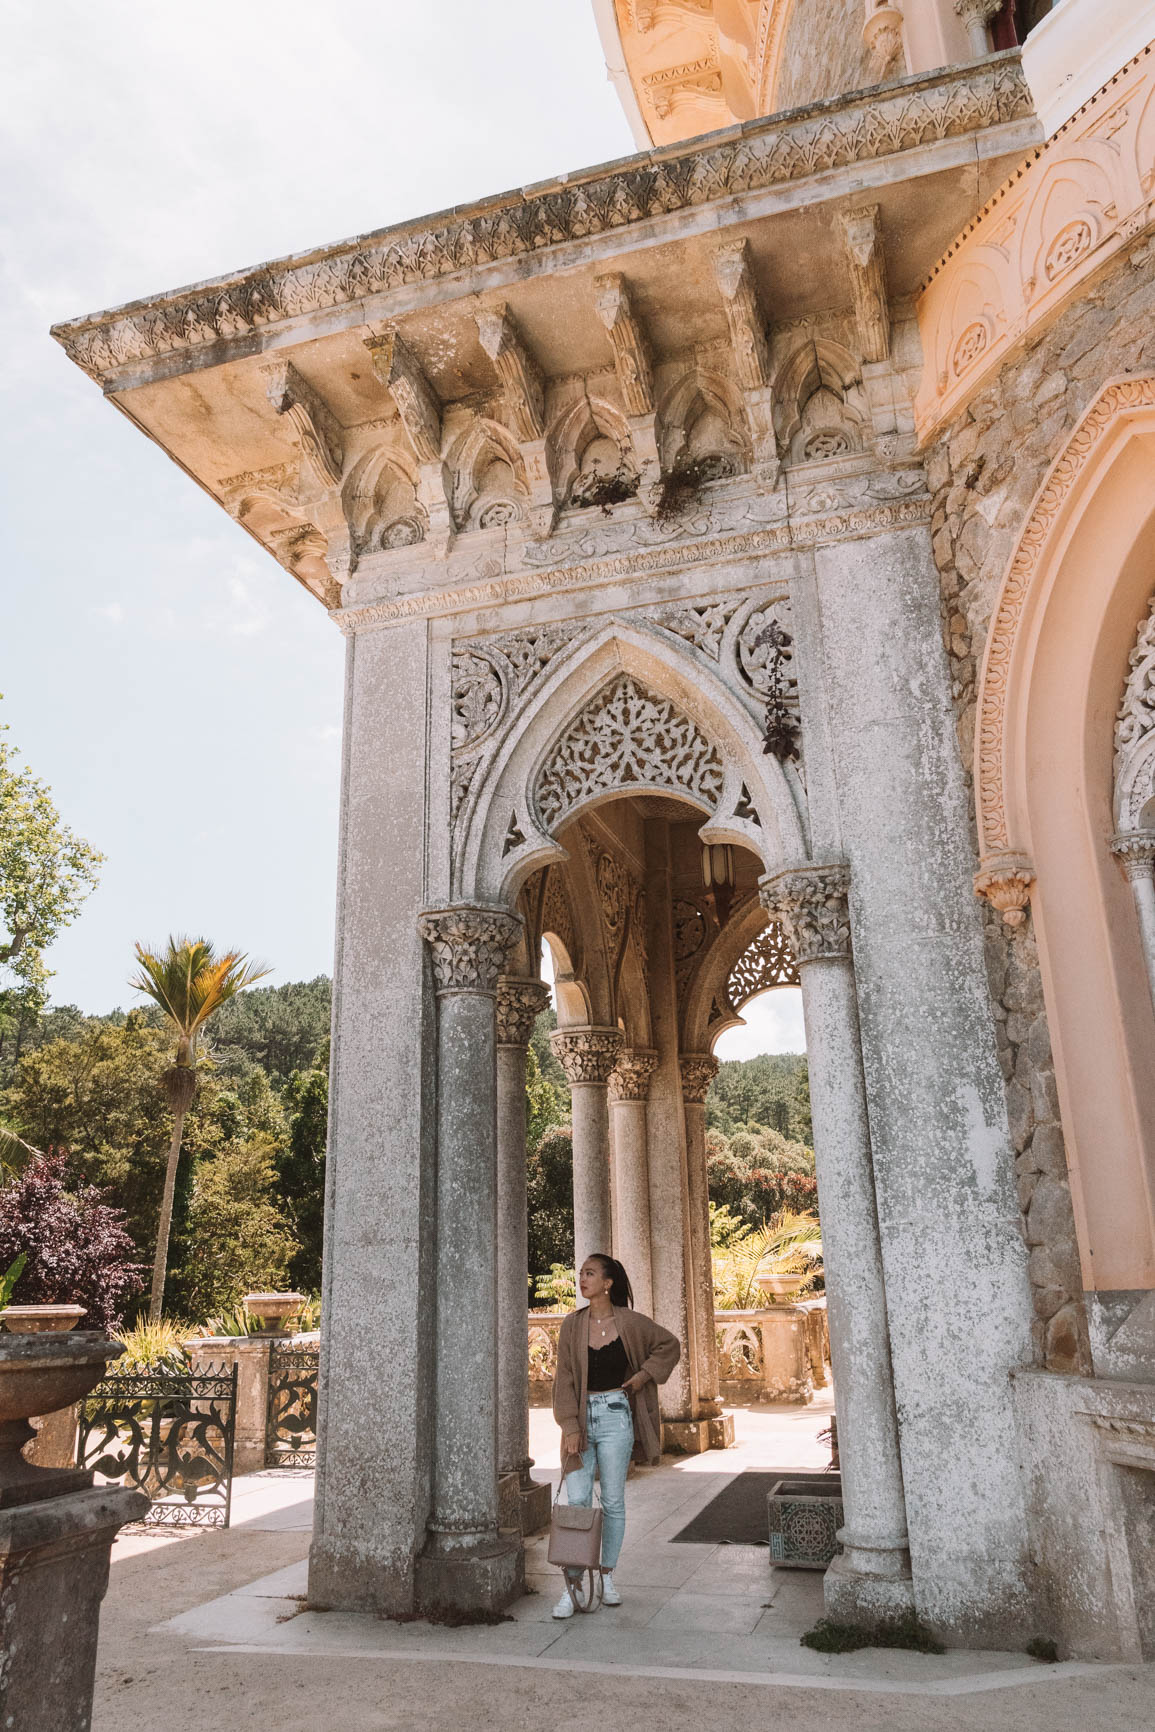 Monserrate Palace - Ultimate Guide to Visiting Sintra Portugal in a day trip from Lisbon Portugal  #Sintra #Lisbon #Portugal #Europe